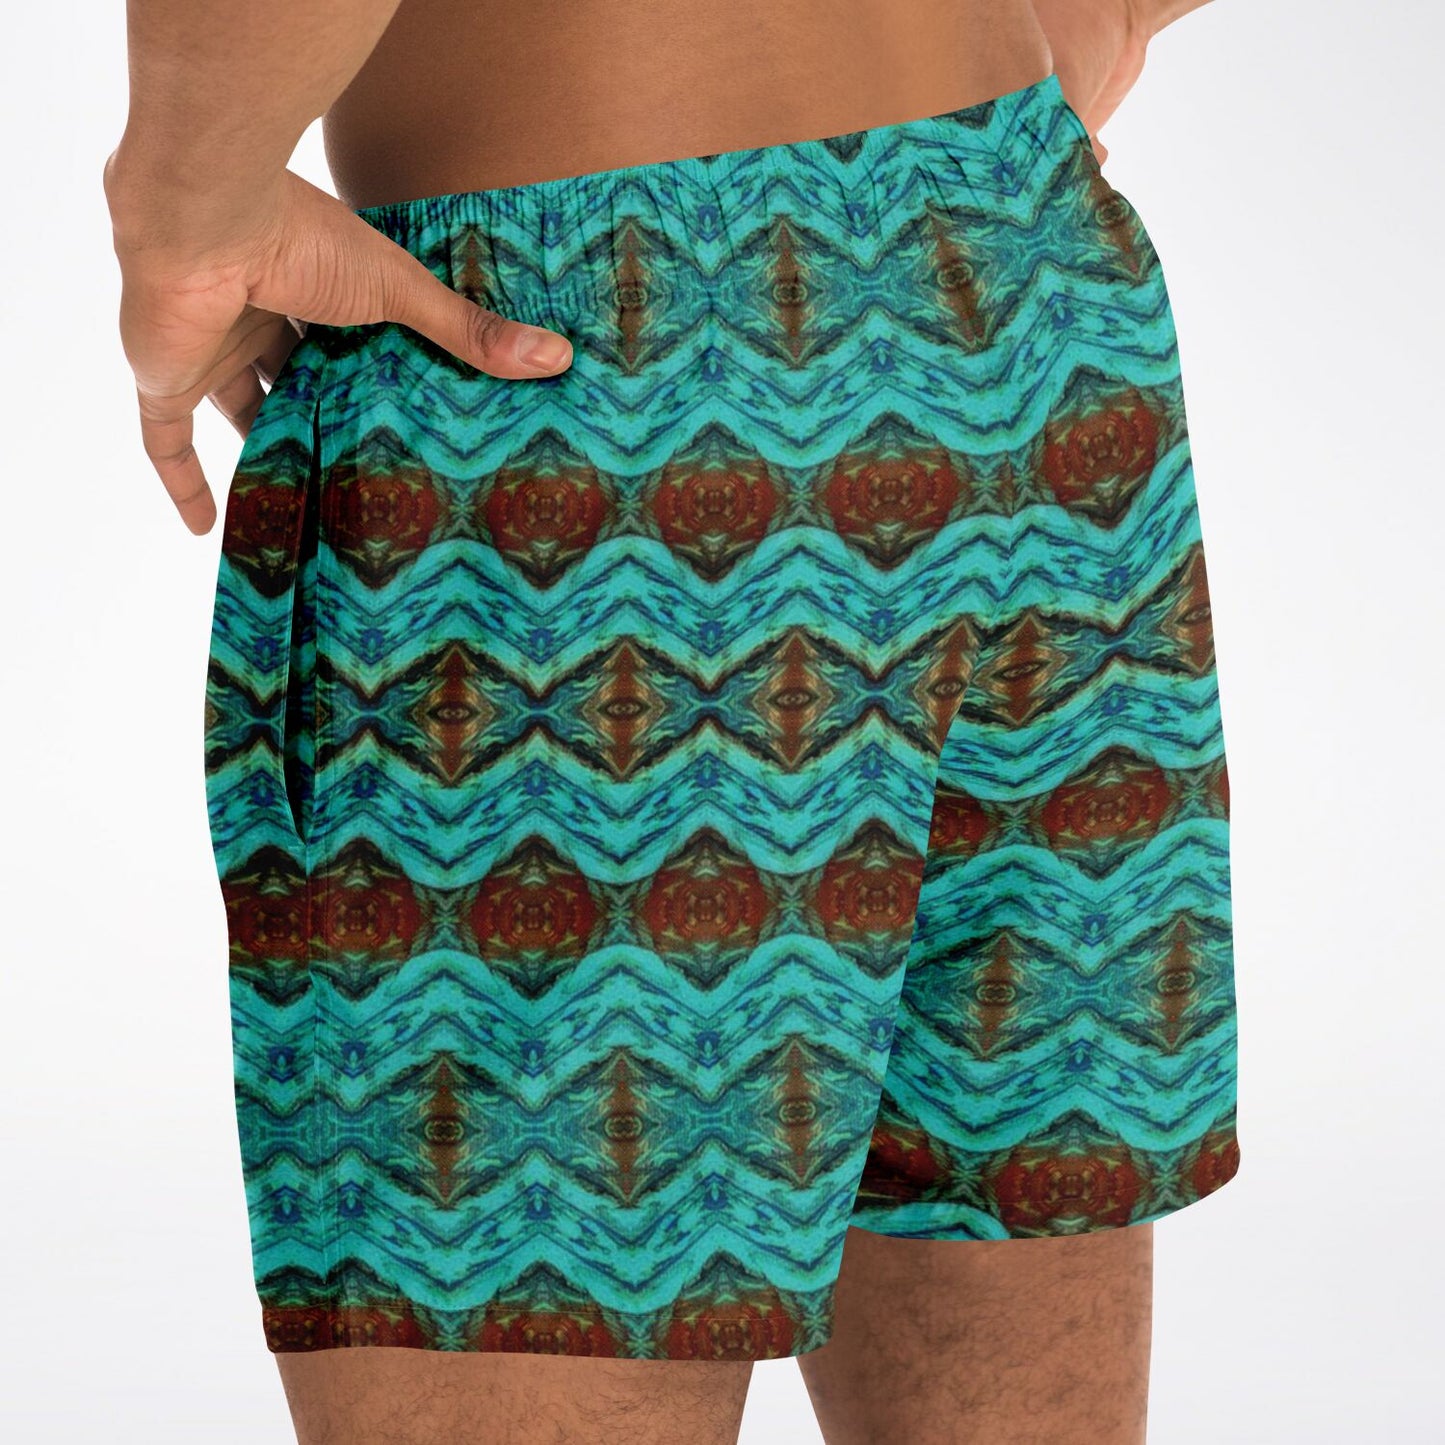 Back view of mens swimming trunks with Cool for the summer blue brown design